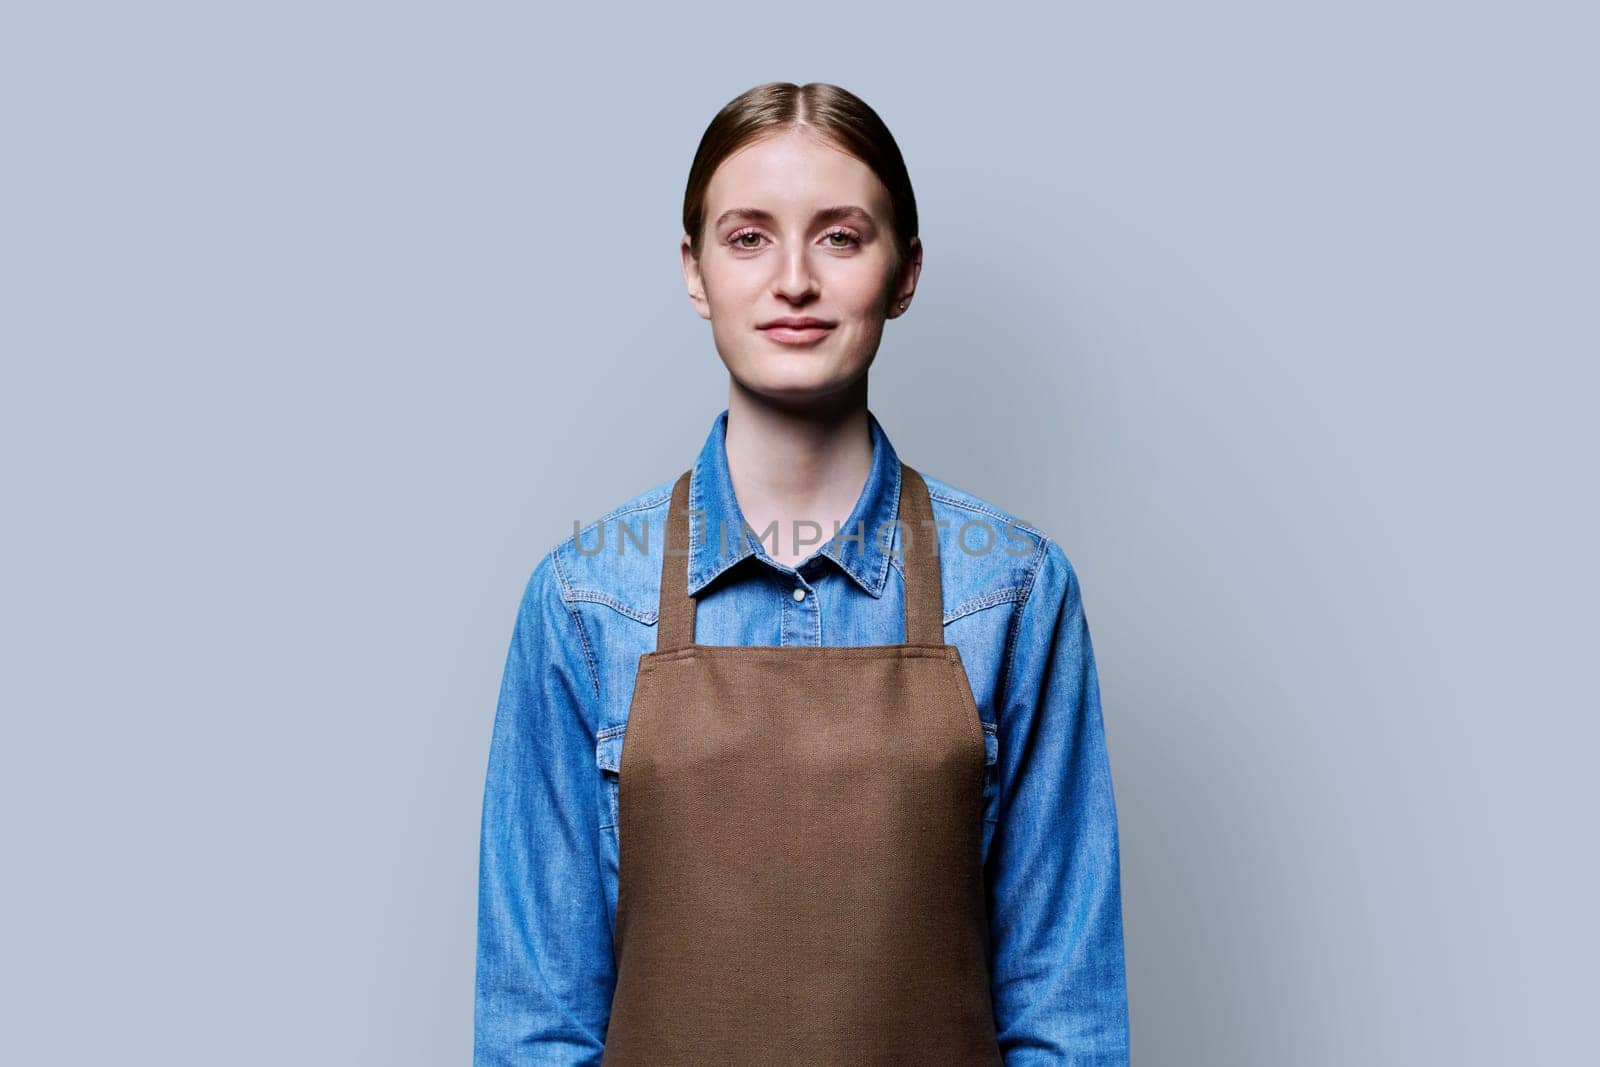 Portrait of young smiling confident woman in apron on grey studio background. Successful positive female looking at camera. Worker, startup, small business, service sector, staff, youth concept